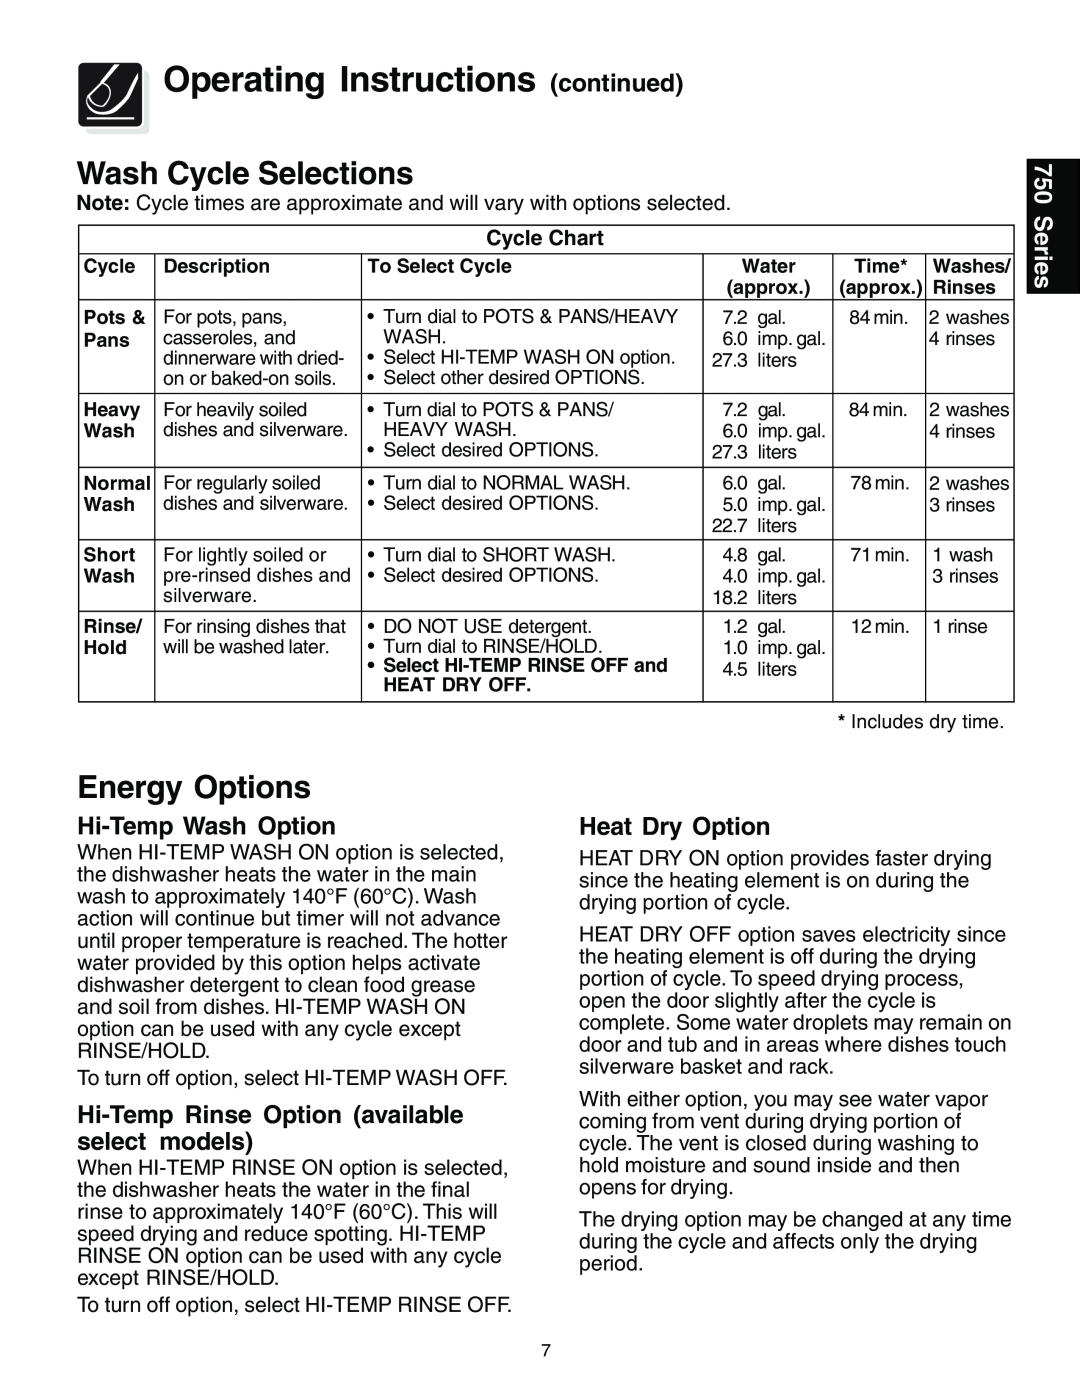 Frigidaire 750, 740 warranty Series, Operating Instructions continued, Wash Cycle Selections, Energy Options, Cycle Chart 